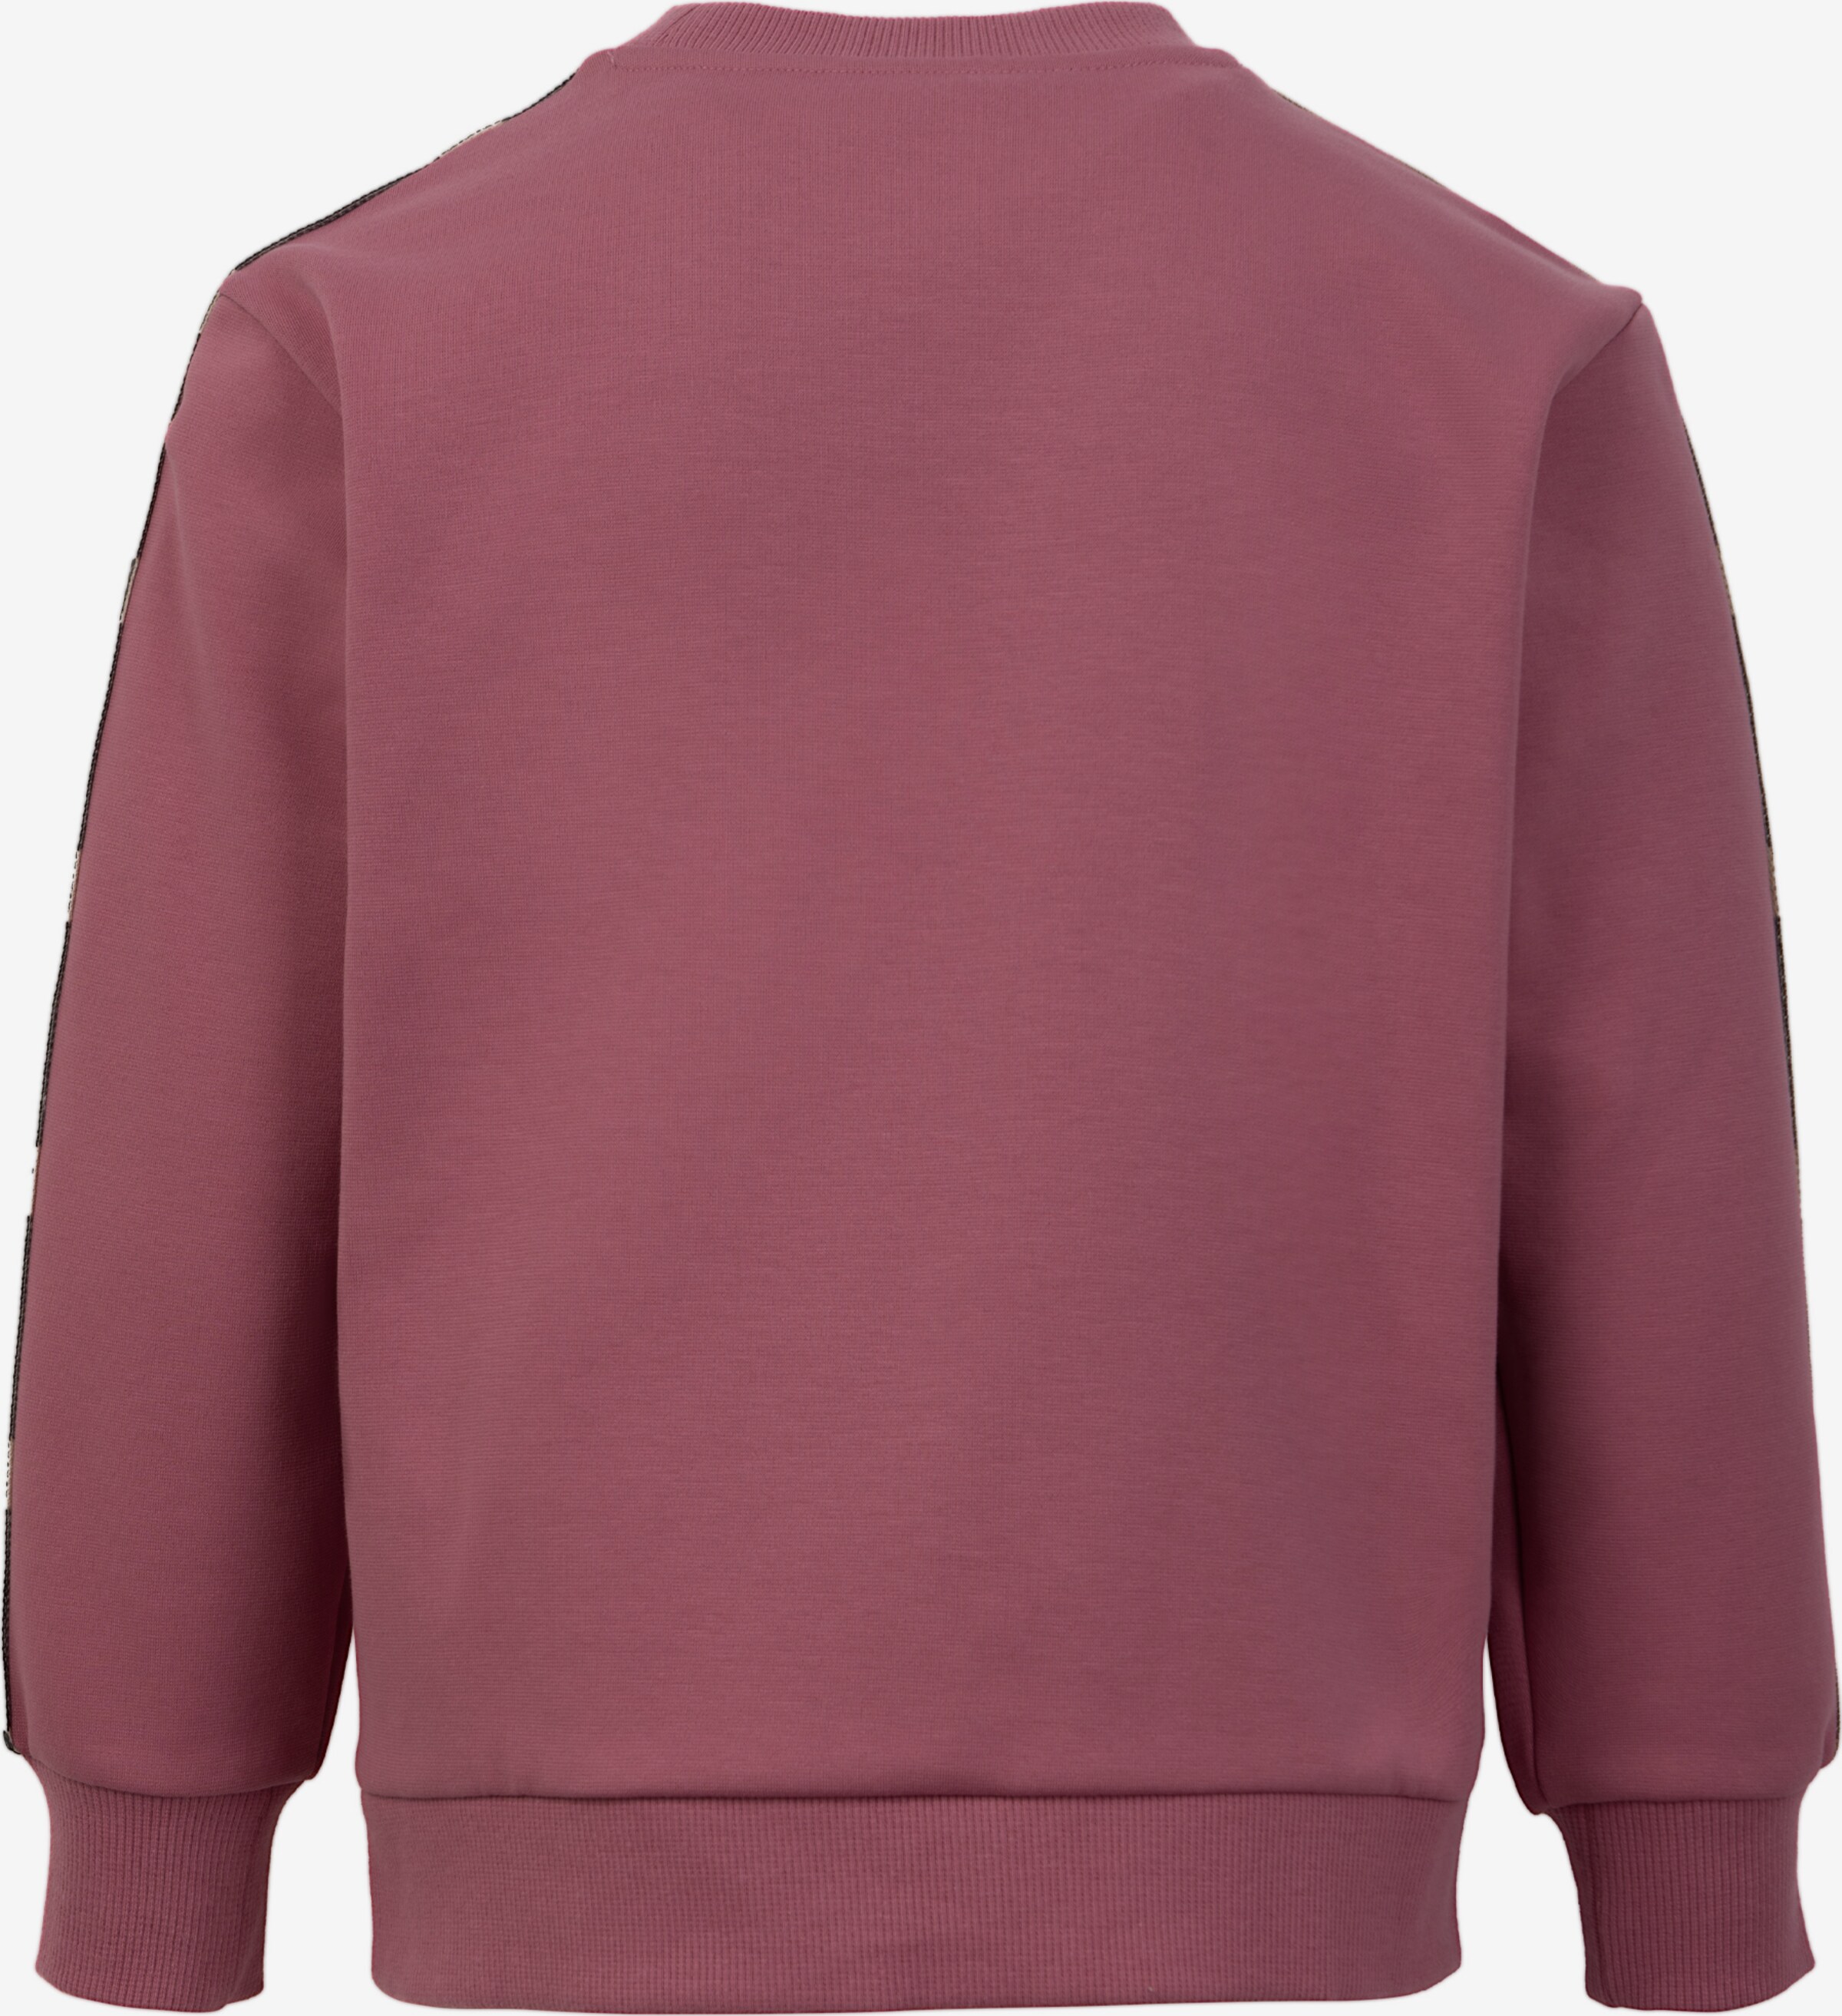 junior YOU in | Sweatshirt Pink ABOUT GIORDANO